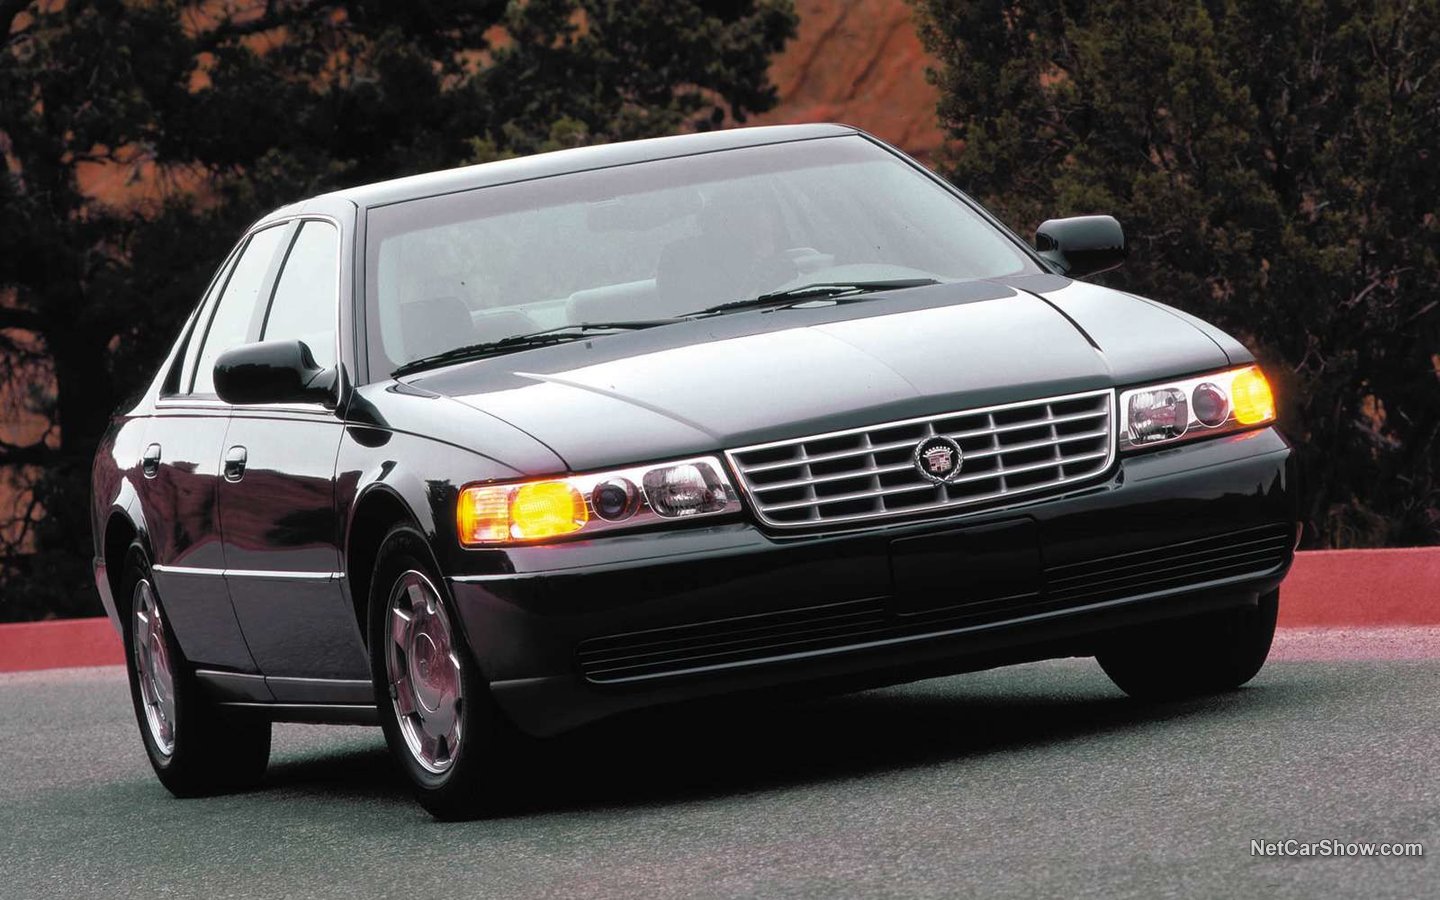 Cadillac Seville 2001 47be208c